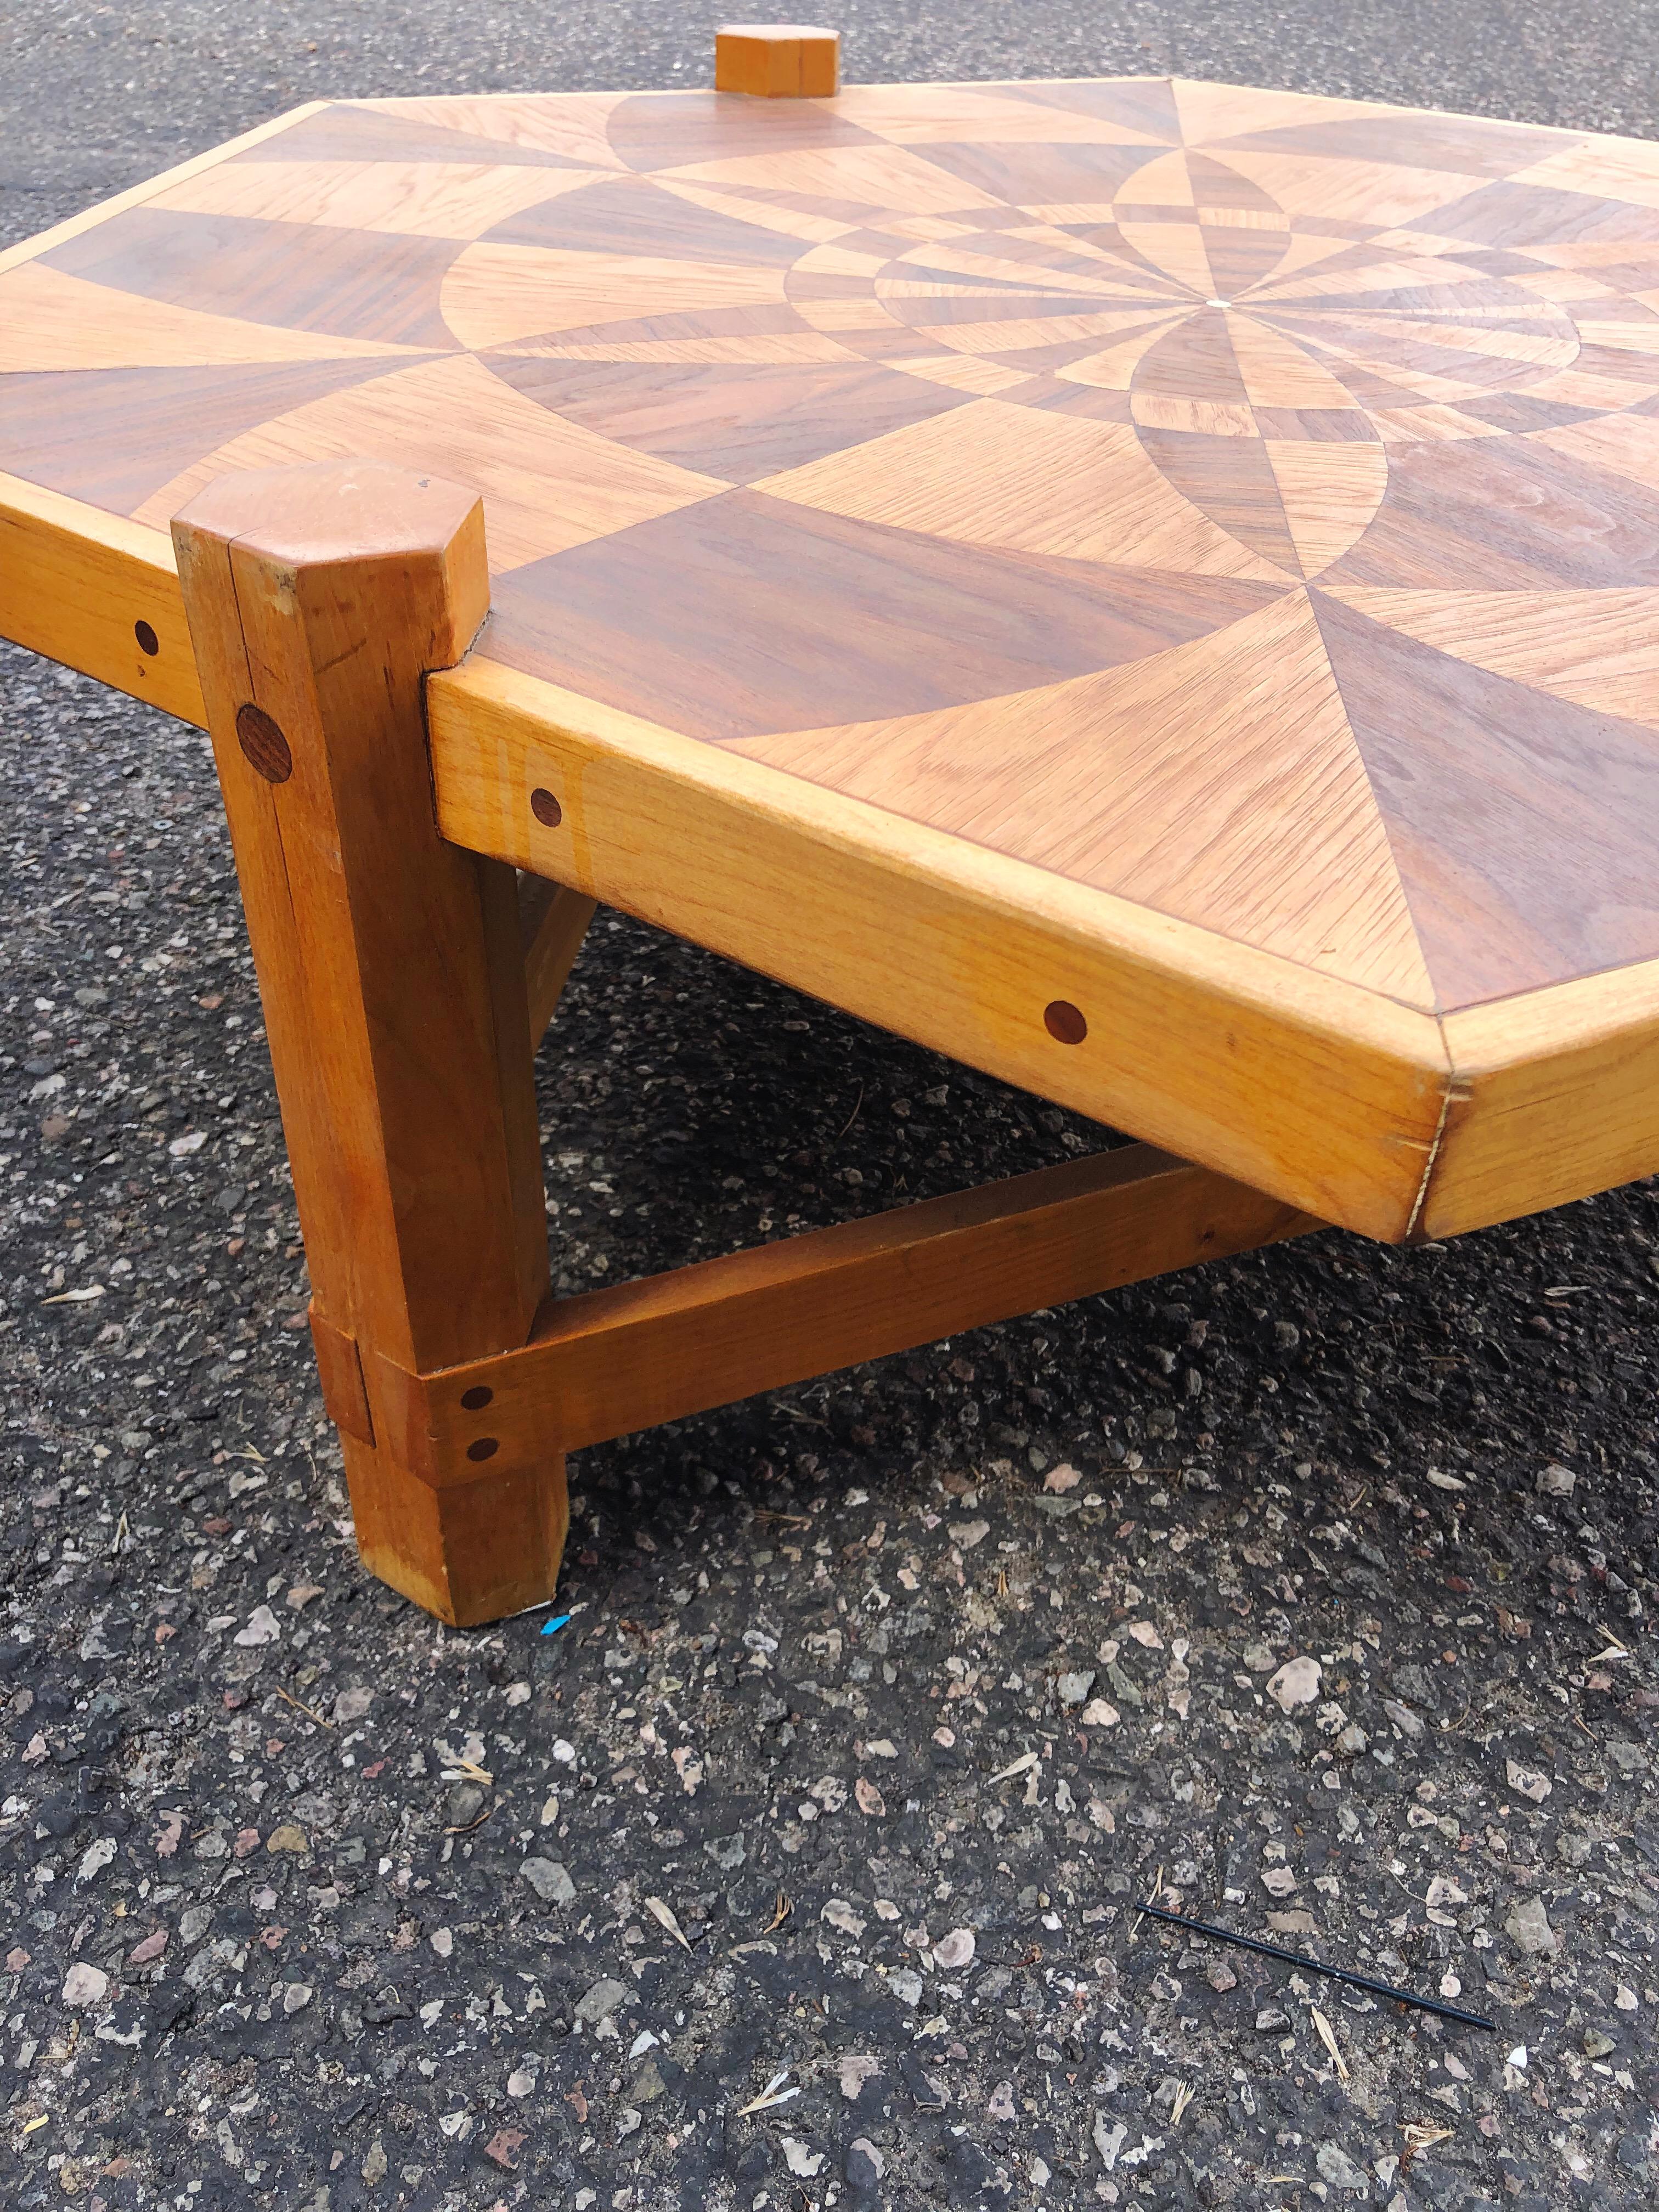 20th Century Modernist Marquetry Folk Art Wooden Inlay Coffee Table with Geometric Design For Sale